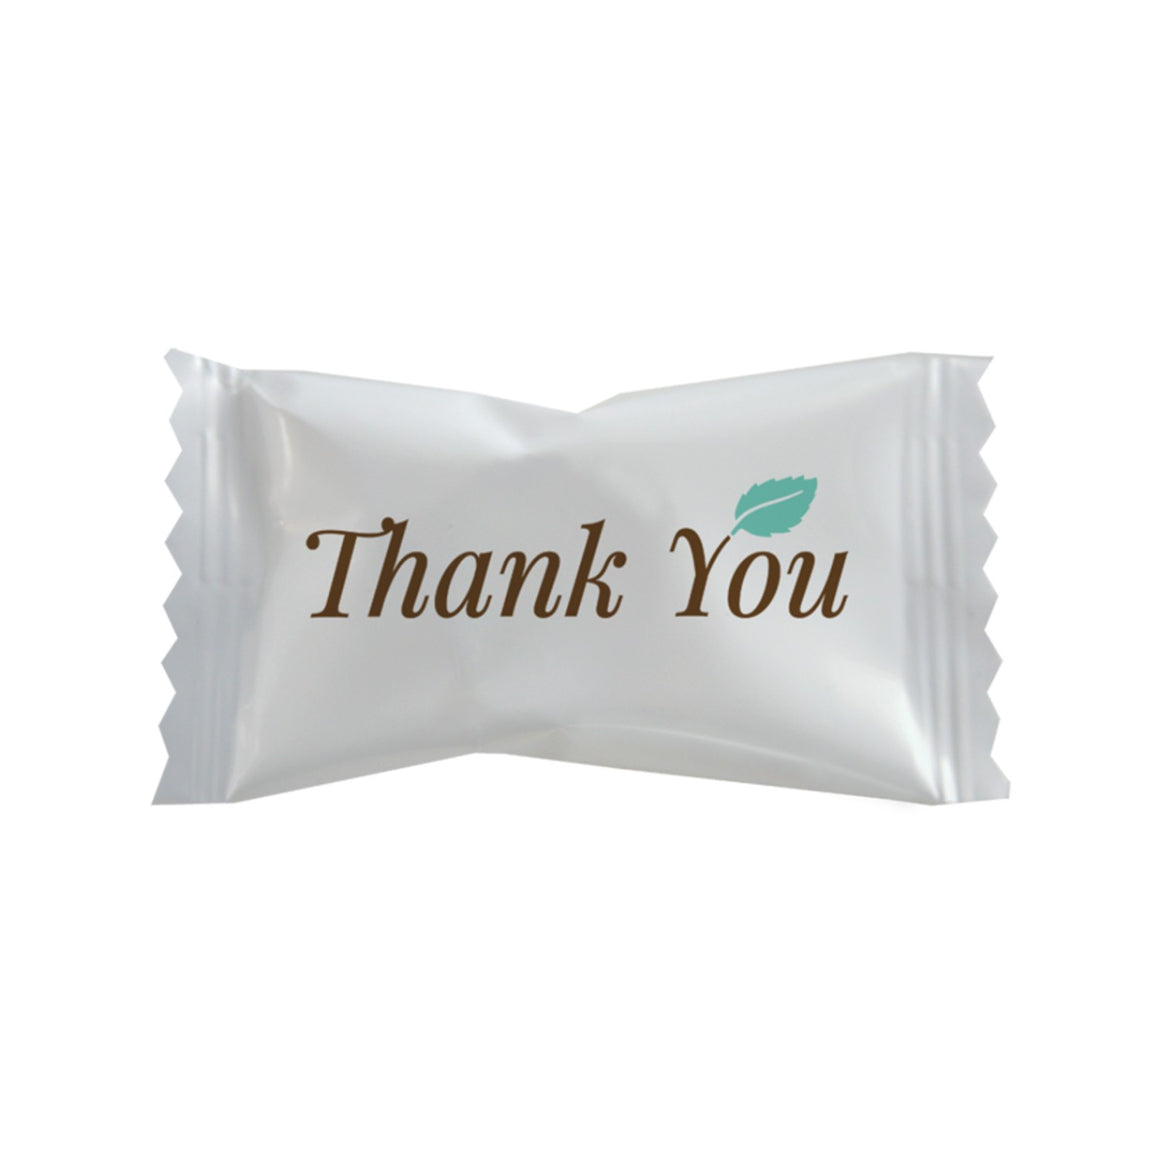 All City Candy "Thank You" Themed Wrapped Buttermints - Bag of 110  Mints Hospitality Mints  For fresh candy and great service, visit www.allcitycandy.com